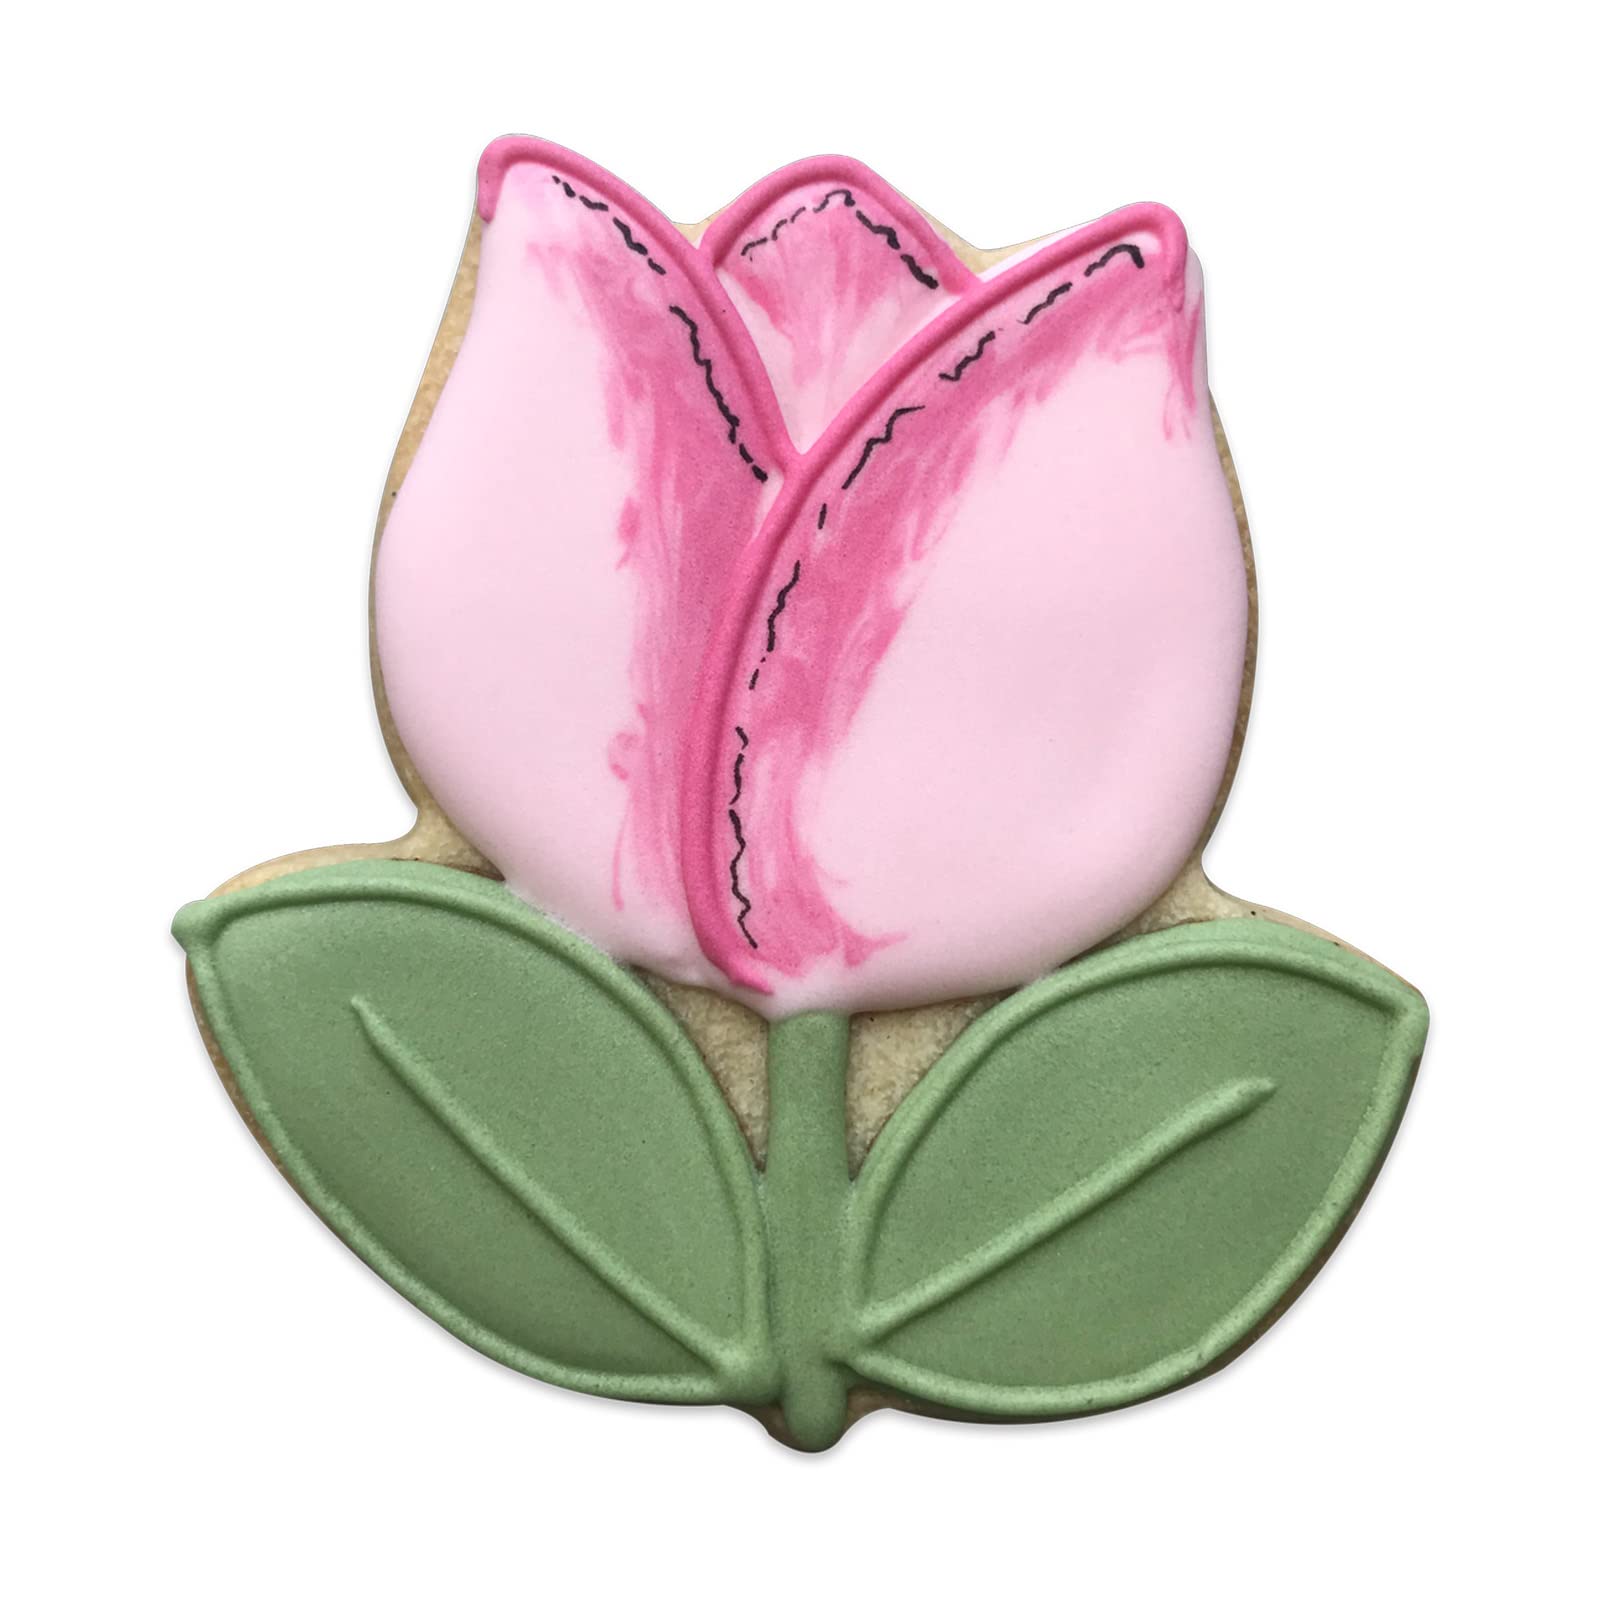 LILIAO Tulip Flower Cookie Cutter - 3.4 x 3.7 inches - Stainless Steel